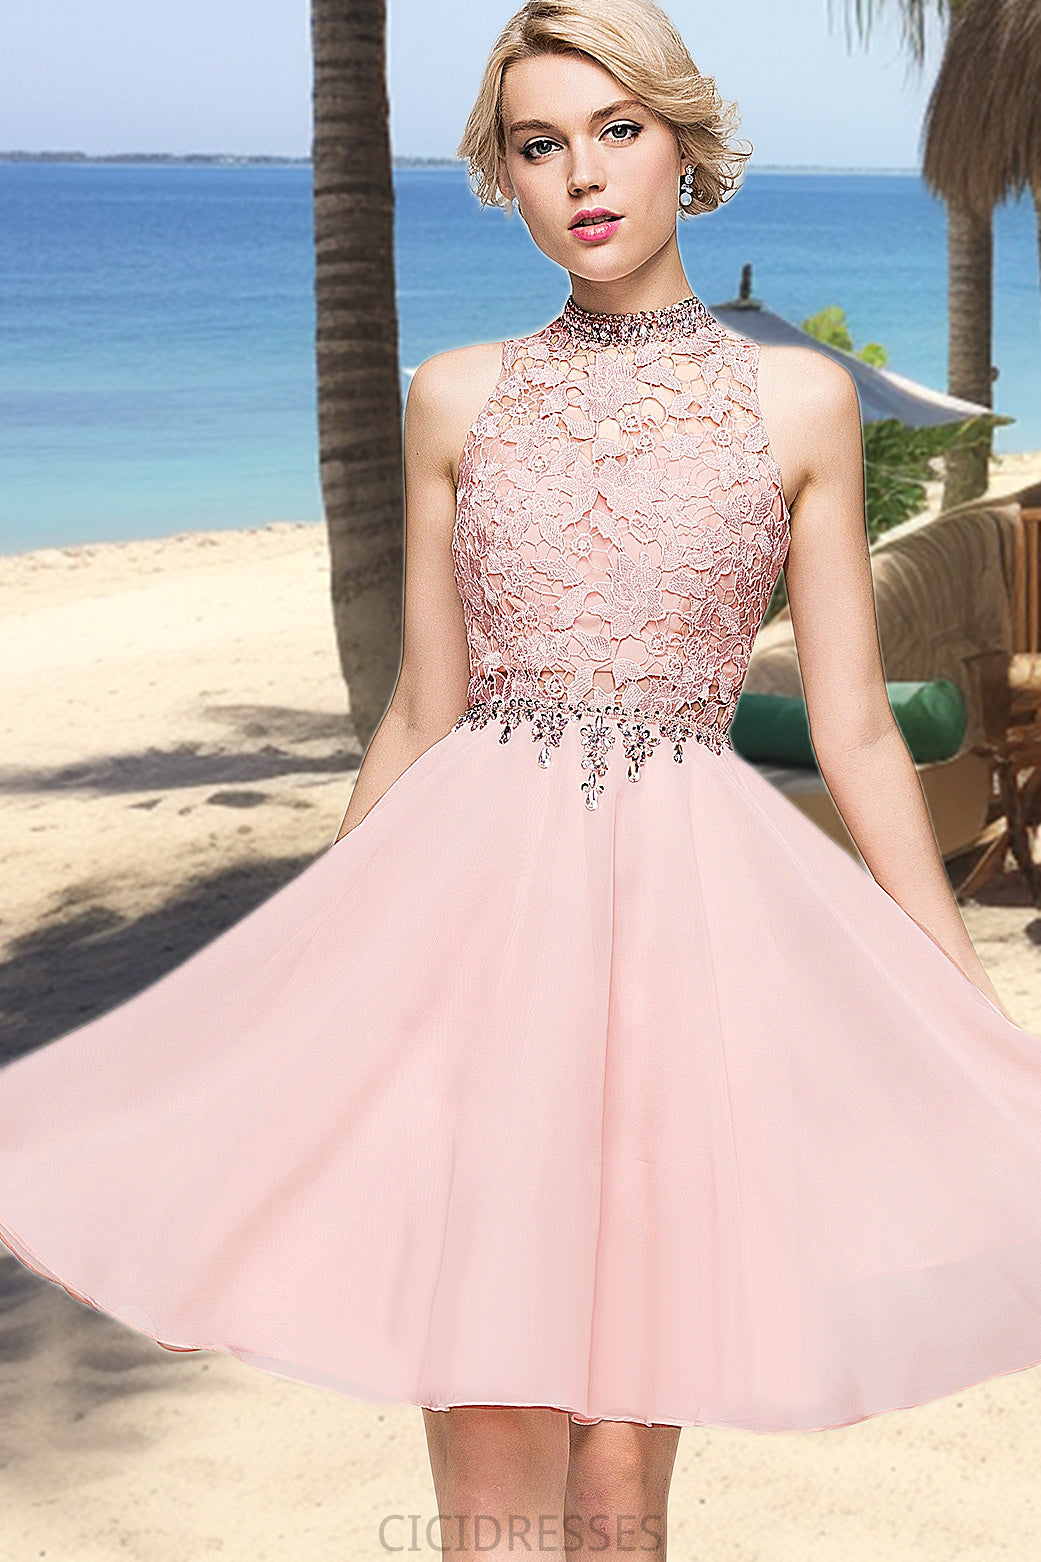 Kierra A-line High Neck Knee-Length Chiffon Lace Homecoming Dress With Beading Sequins CIC8P0020596